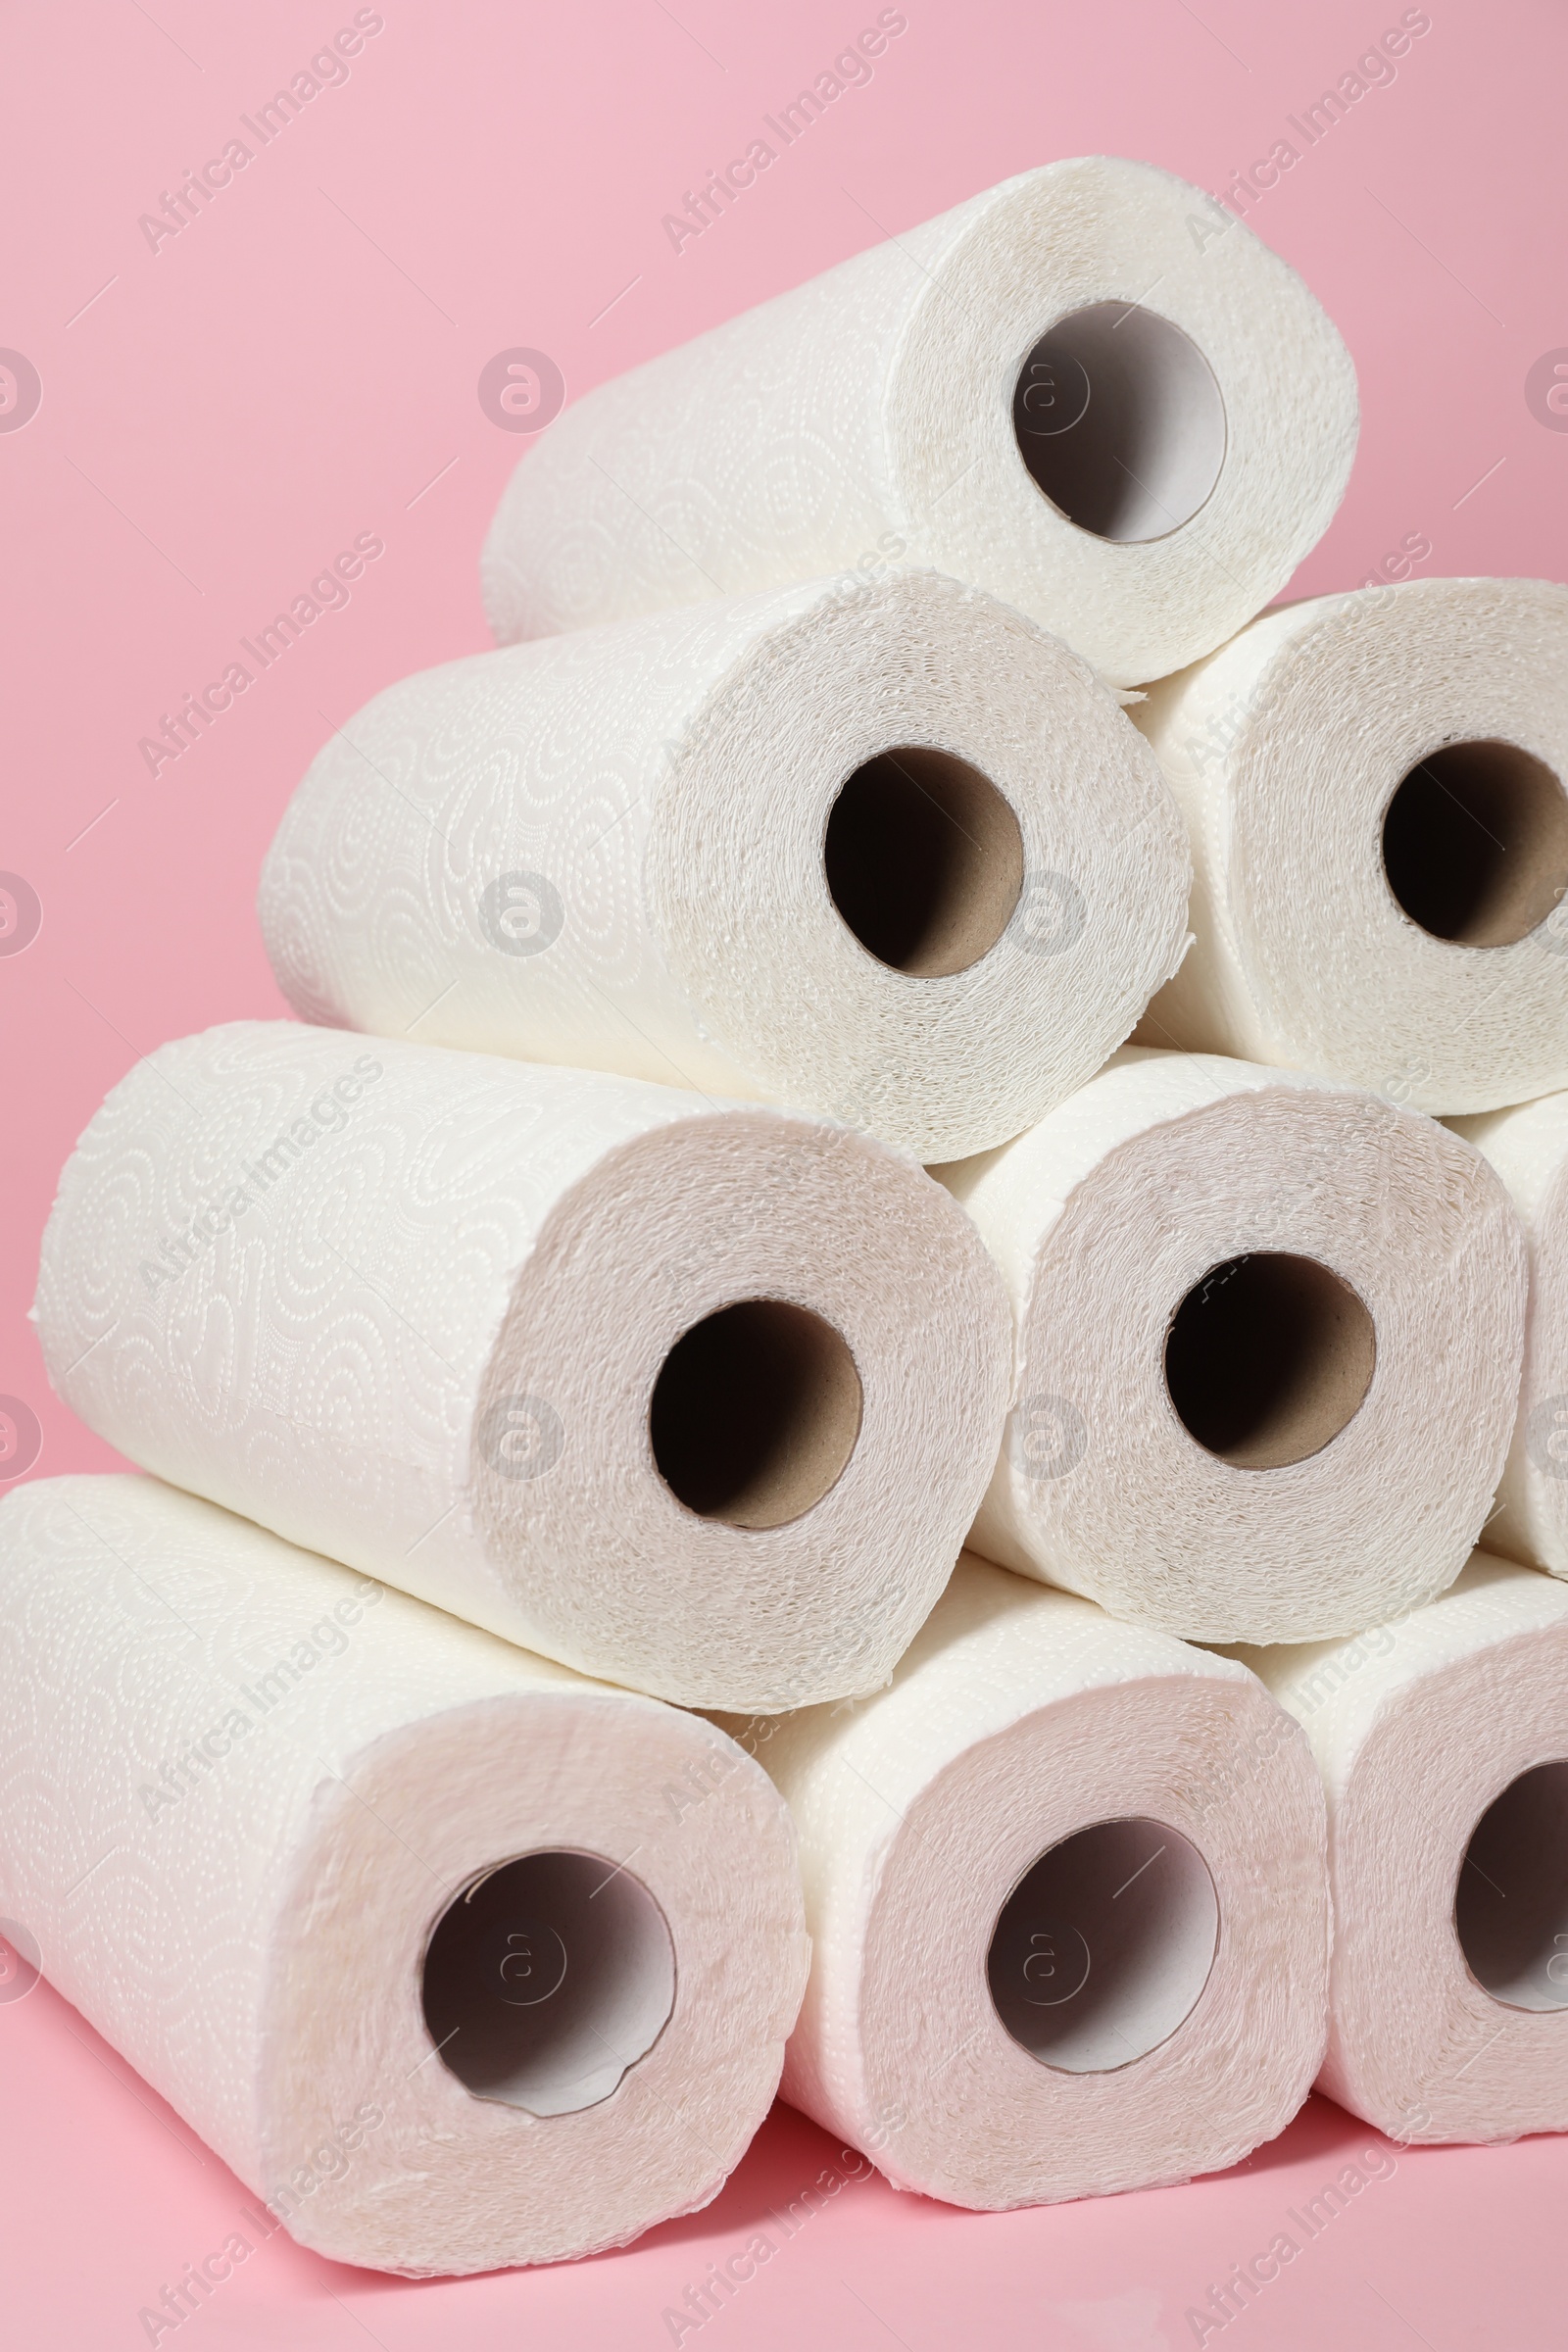 Photo of Many rolls of paper towels on pink background